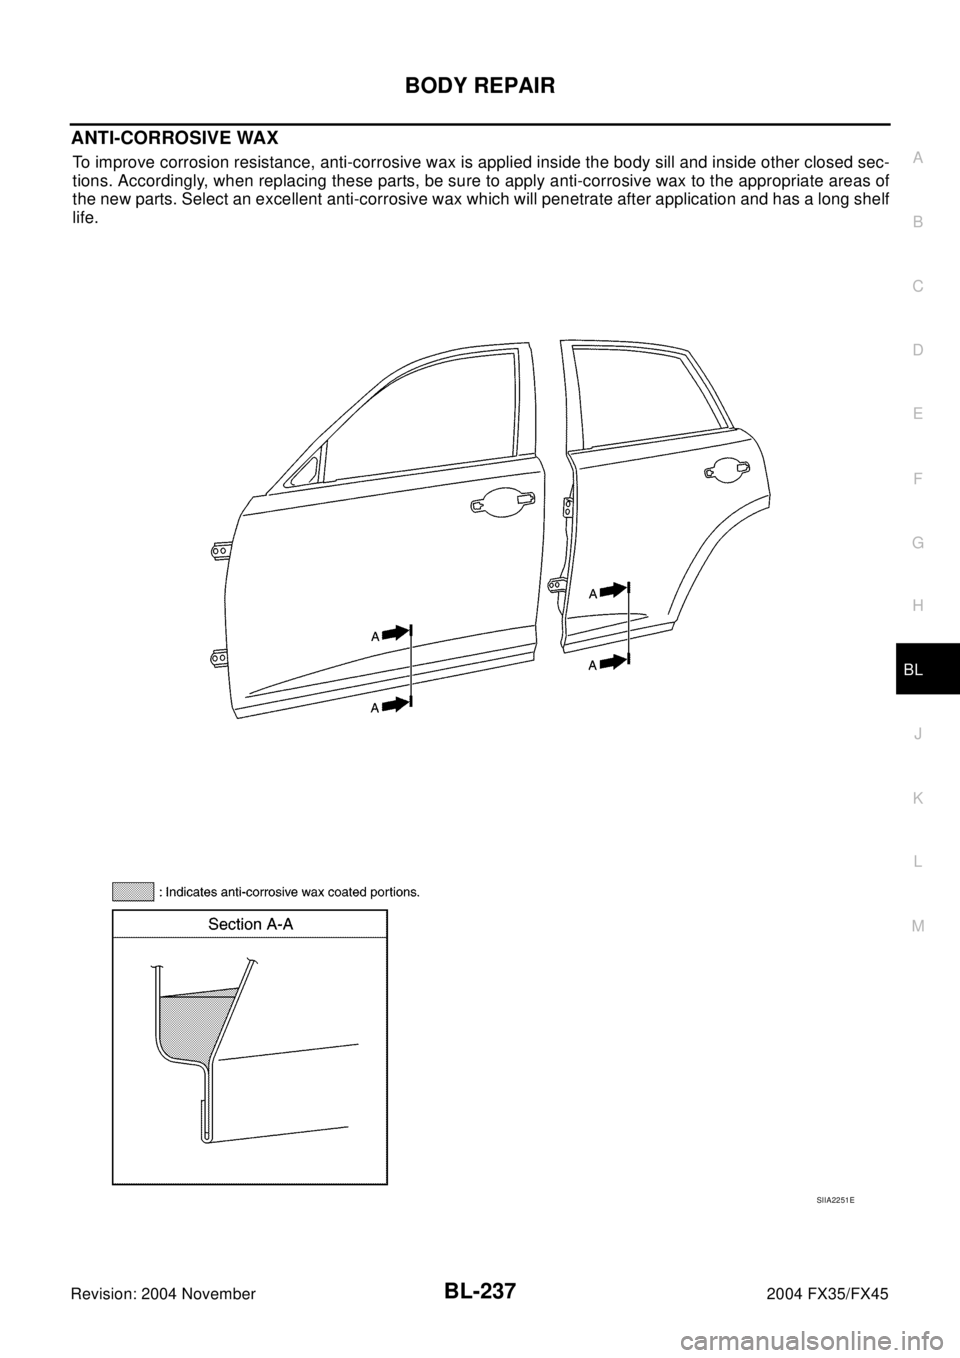 INFINITI FX35 2004  Service Manual BODY REPAIR
BL-237
C
D
E
F
G
H
J
K
L
MA
B
BL
Revision: 2004 November2004 FX35/FX45
ANTI-CORROSIVE WAX
To improve corrosion resistance, anti-corrosive wax is applied inside the body sill and inside oth